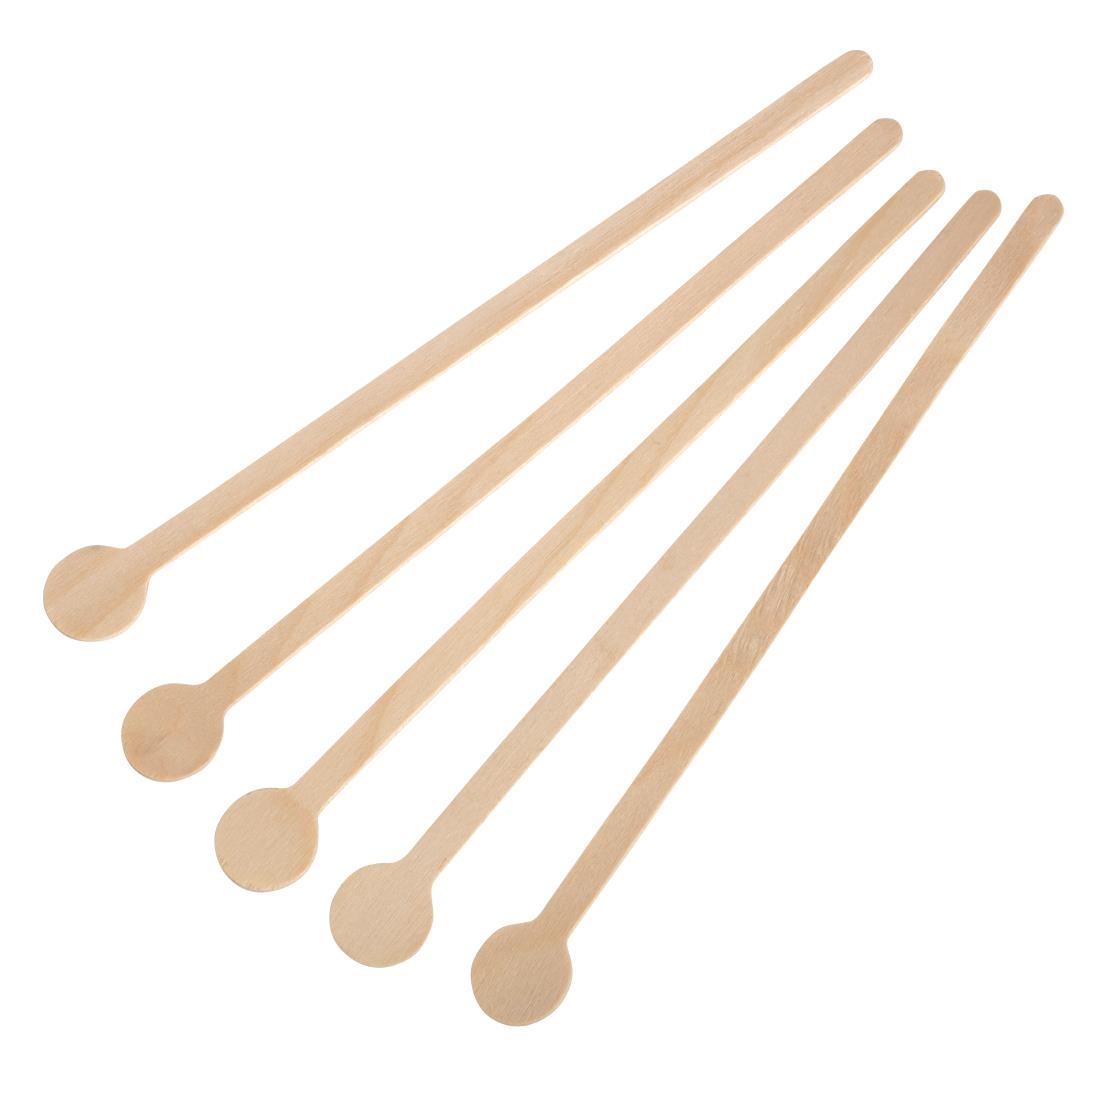 Fiesta Compostable Wooden Cocktail Stirrers 200mm (Pack of 100) - DB494  - 3